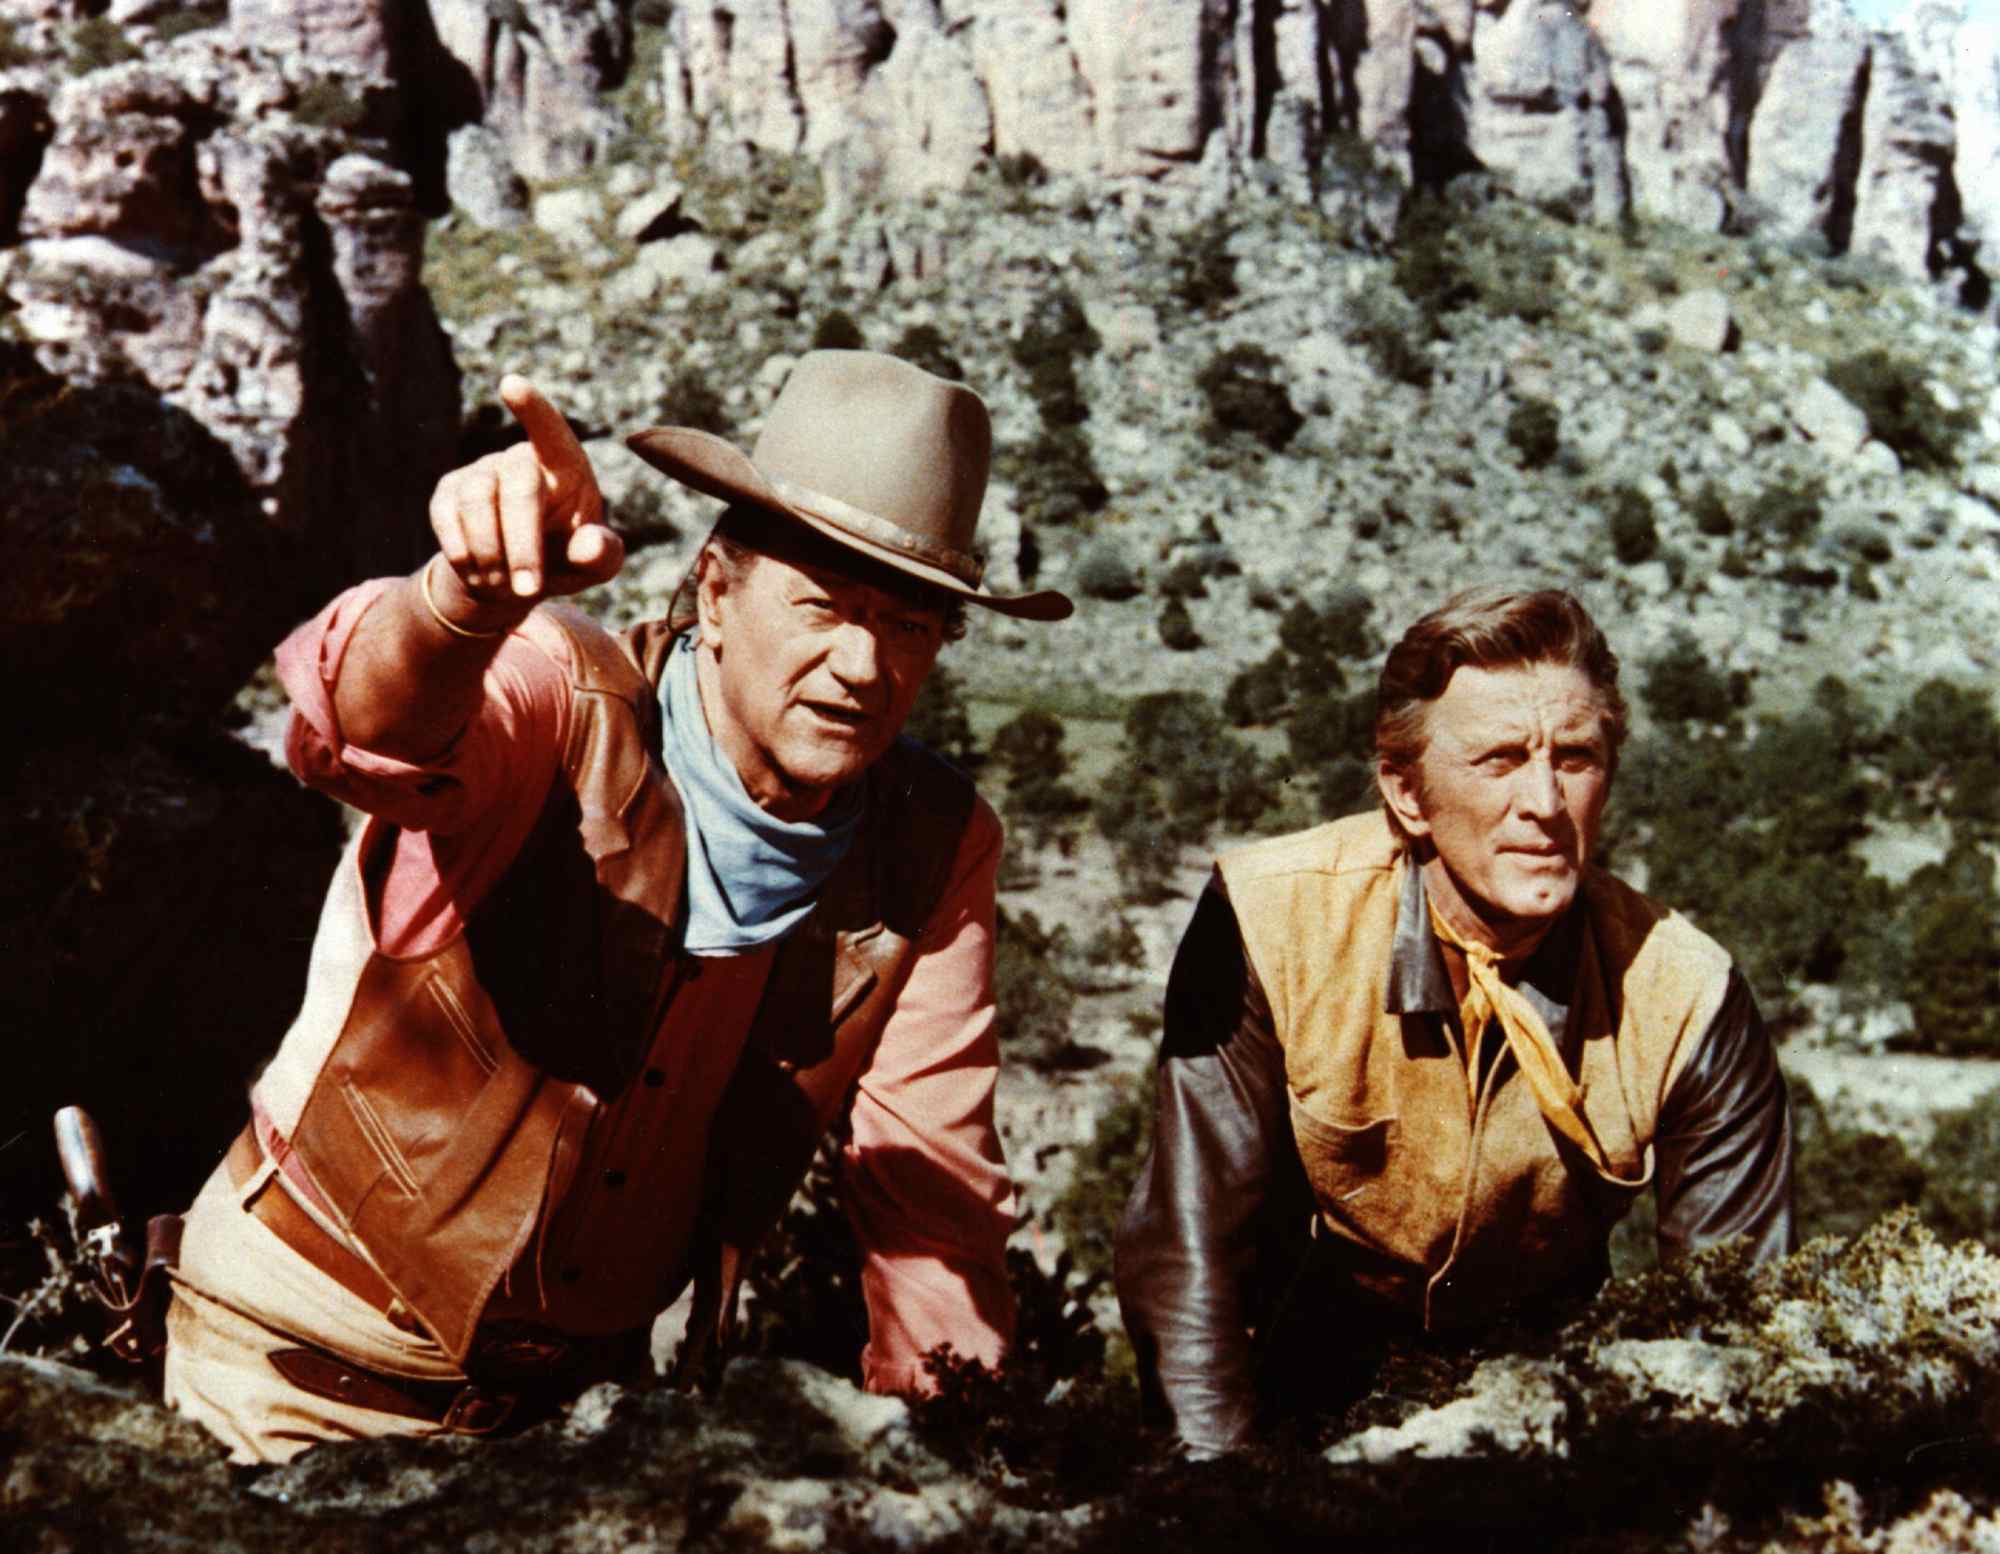 John Wayne and Kirk Douglas wearing Western costumes. Wayne is holding out his finger, pointing. 